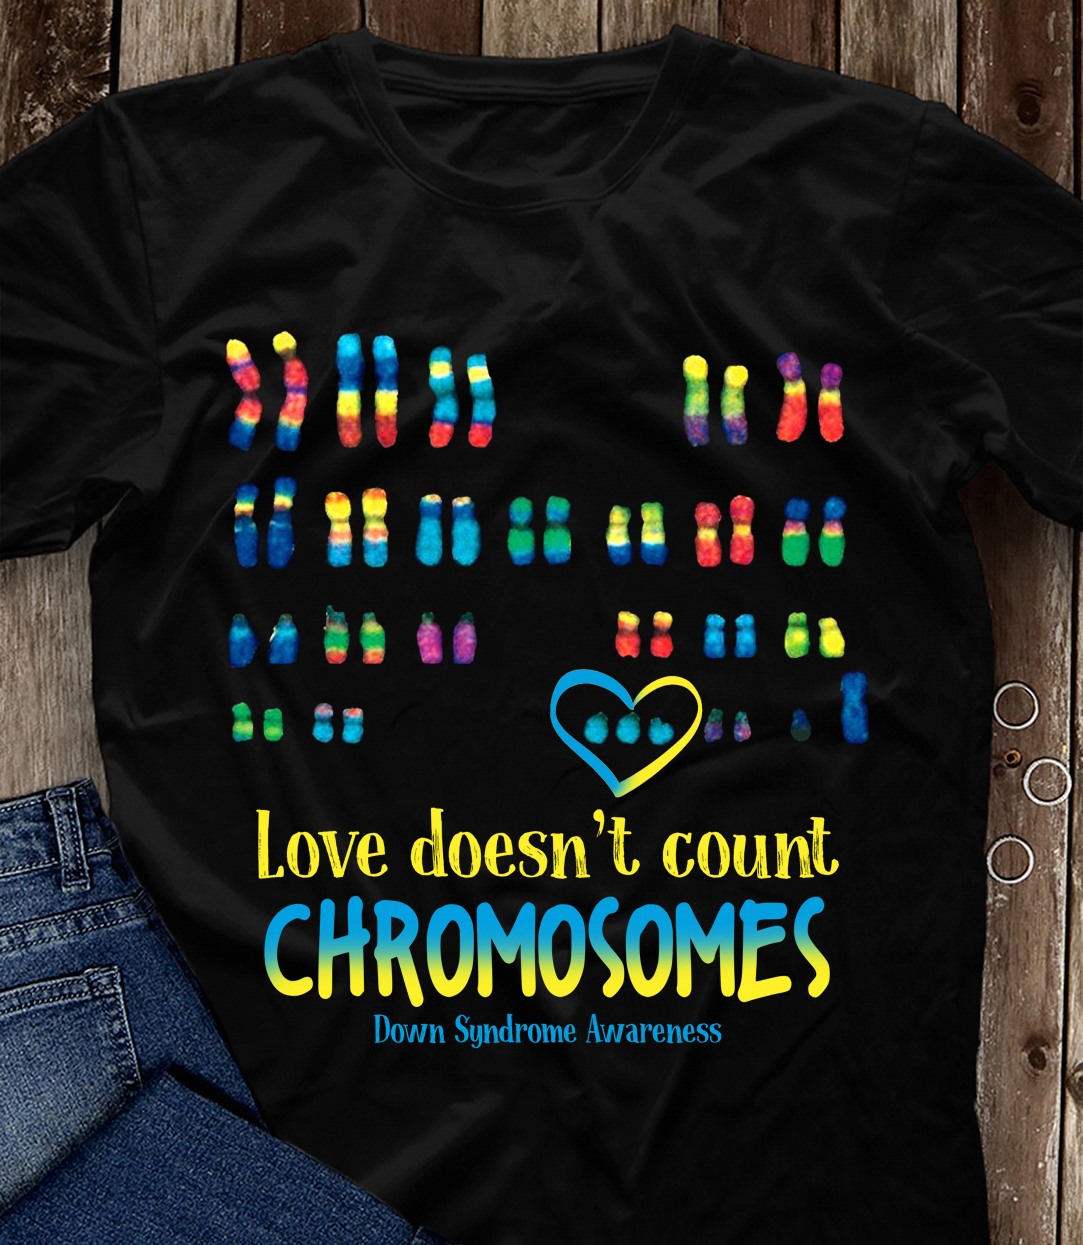 Love doesn’t count Chromosomes – Down Syndrome Awareness